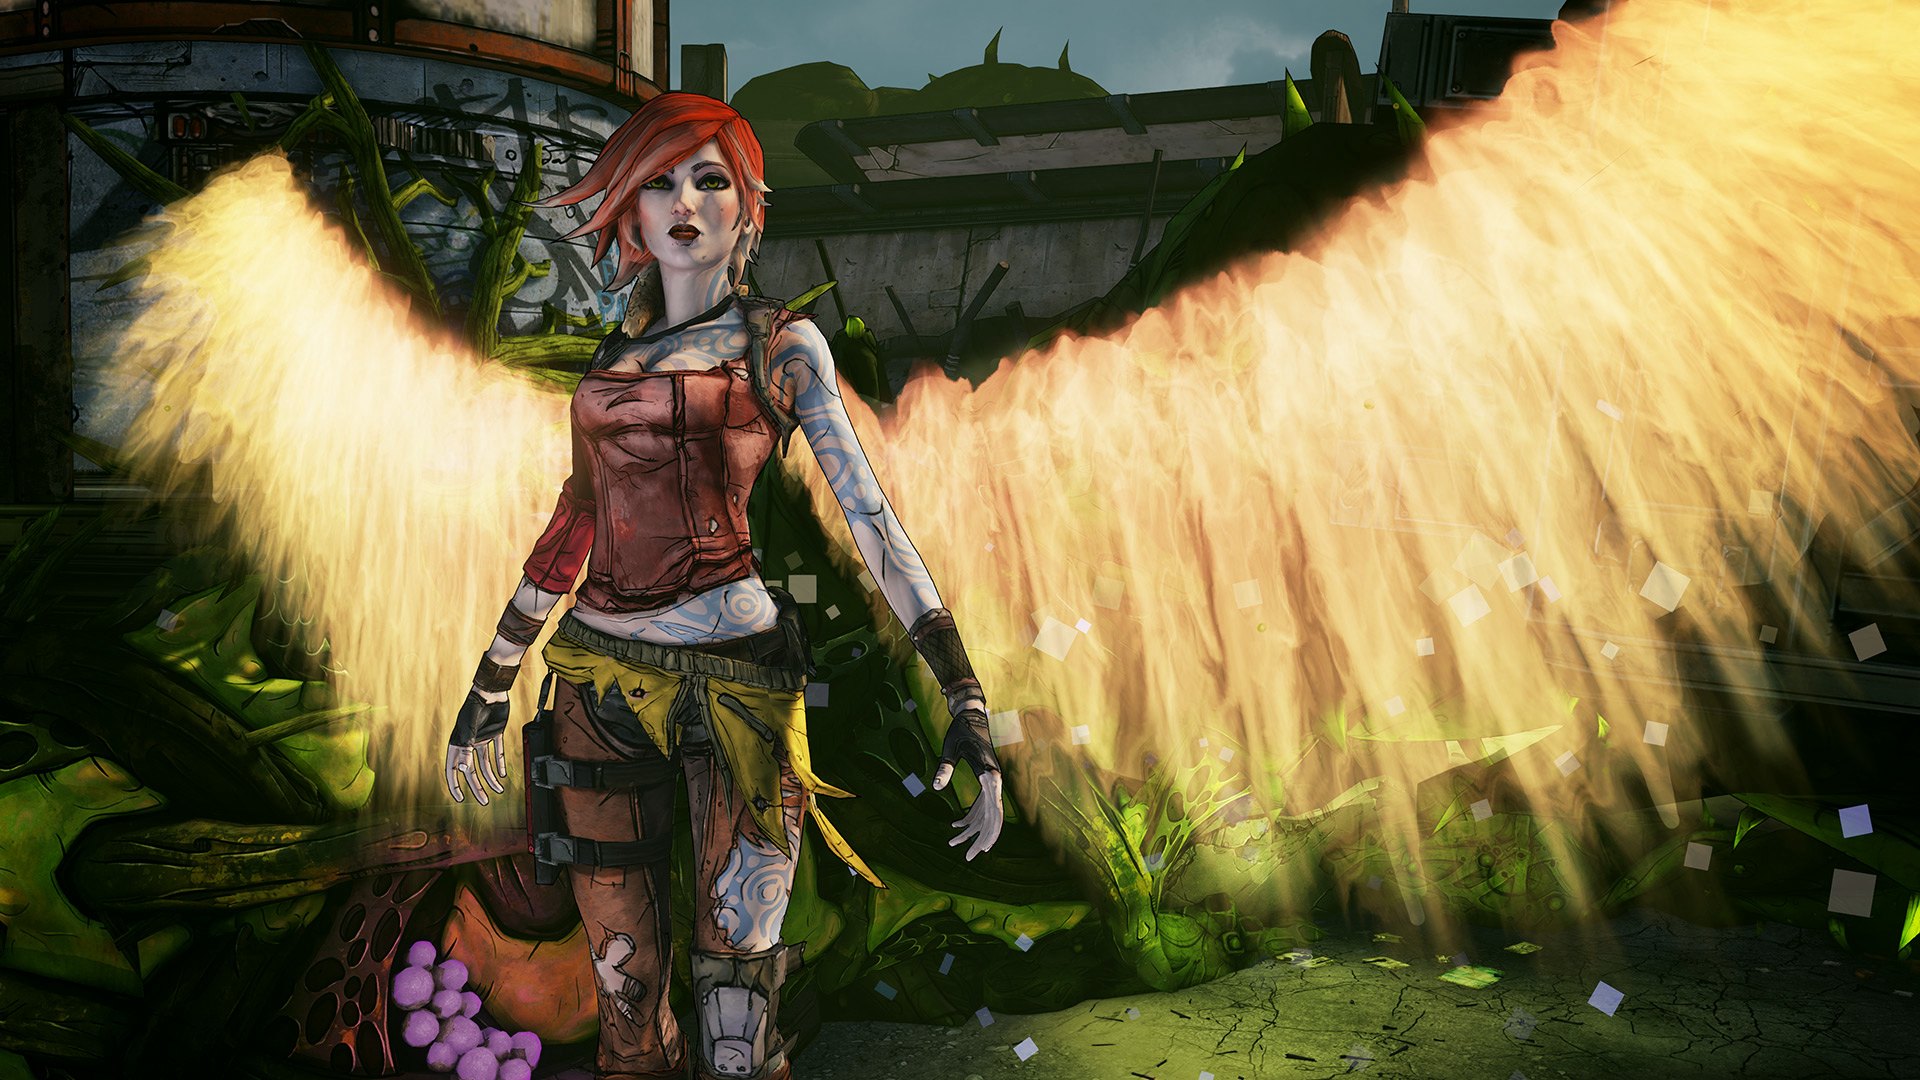 [$ 19.33] Borderlands 2: Commander Lilith & the Fight for Sanctuary DLC Steam Altergift